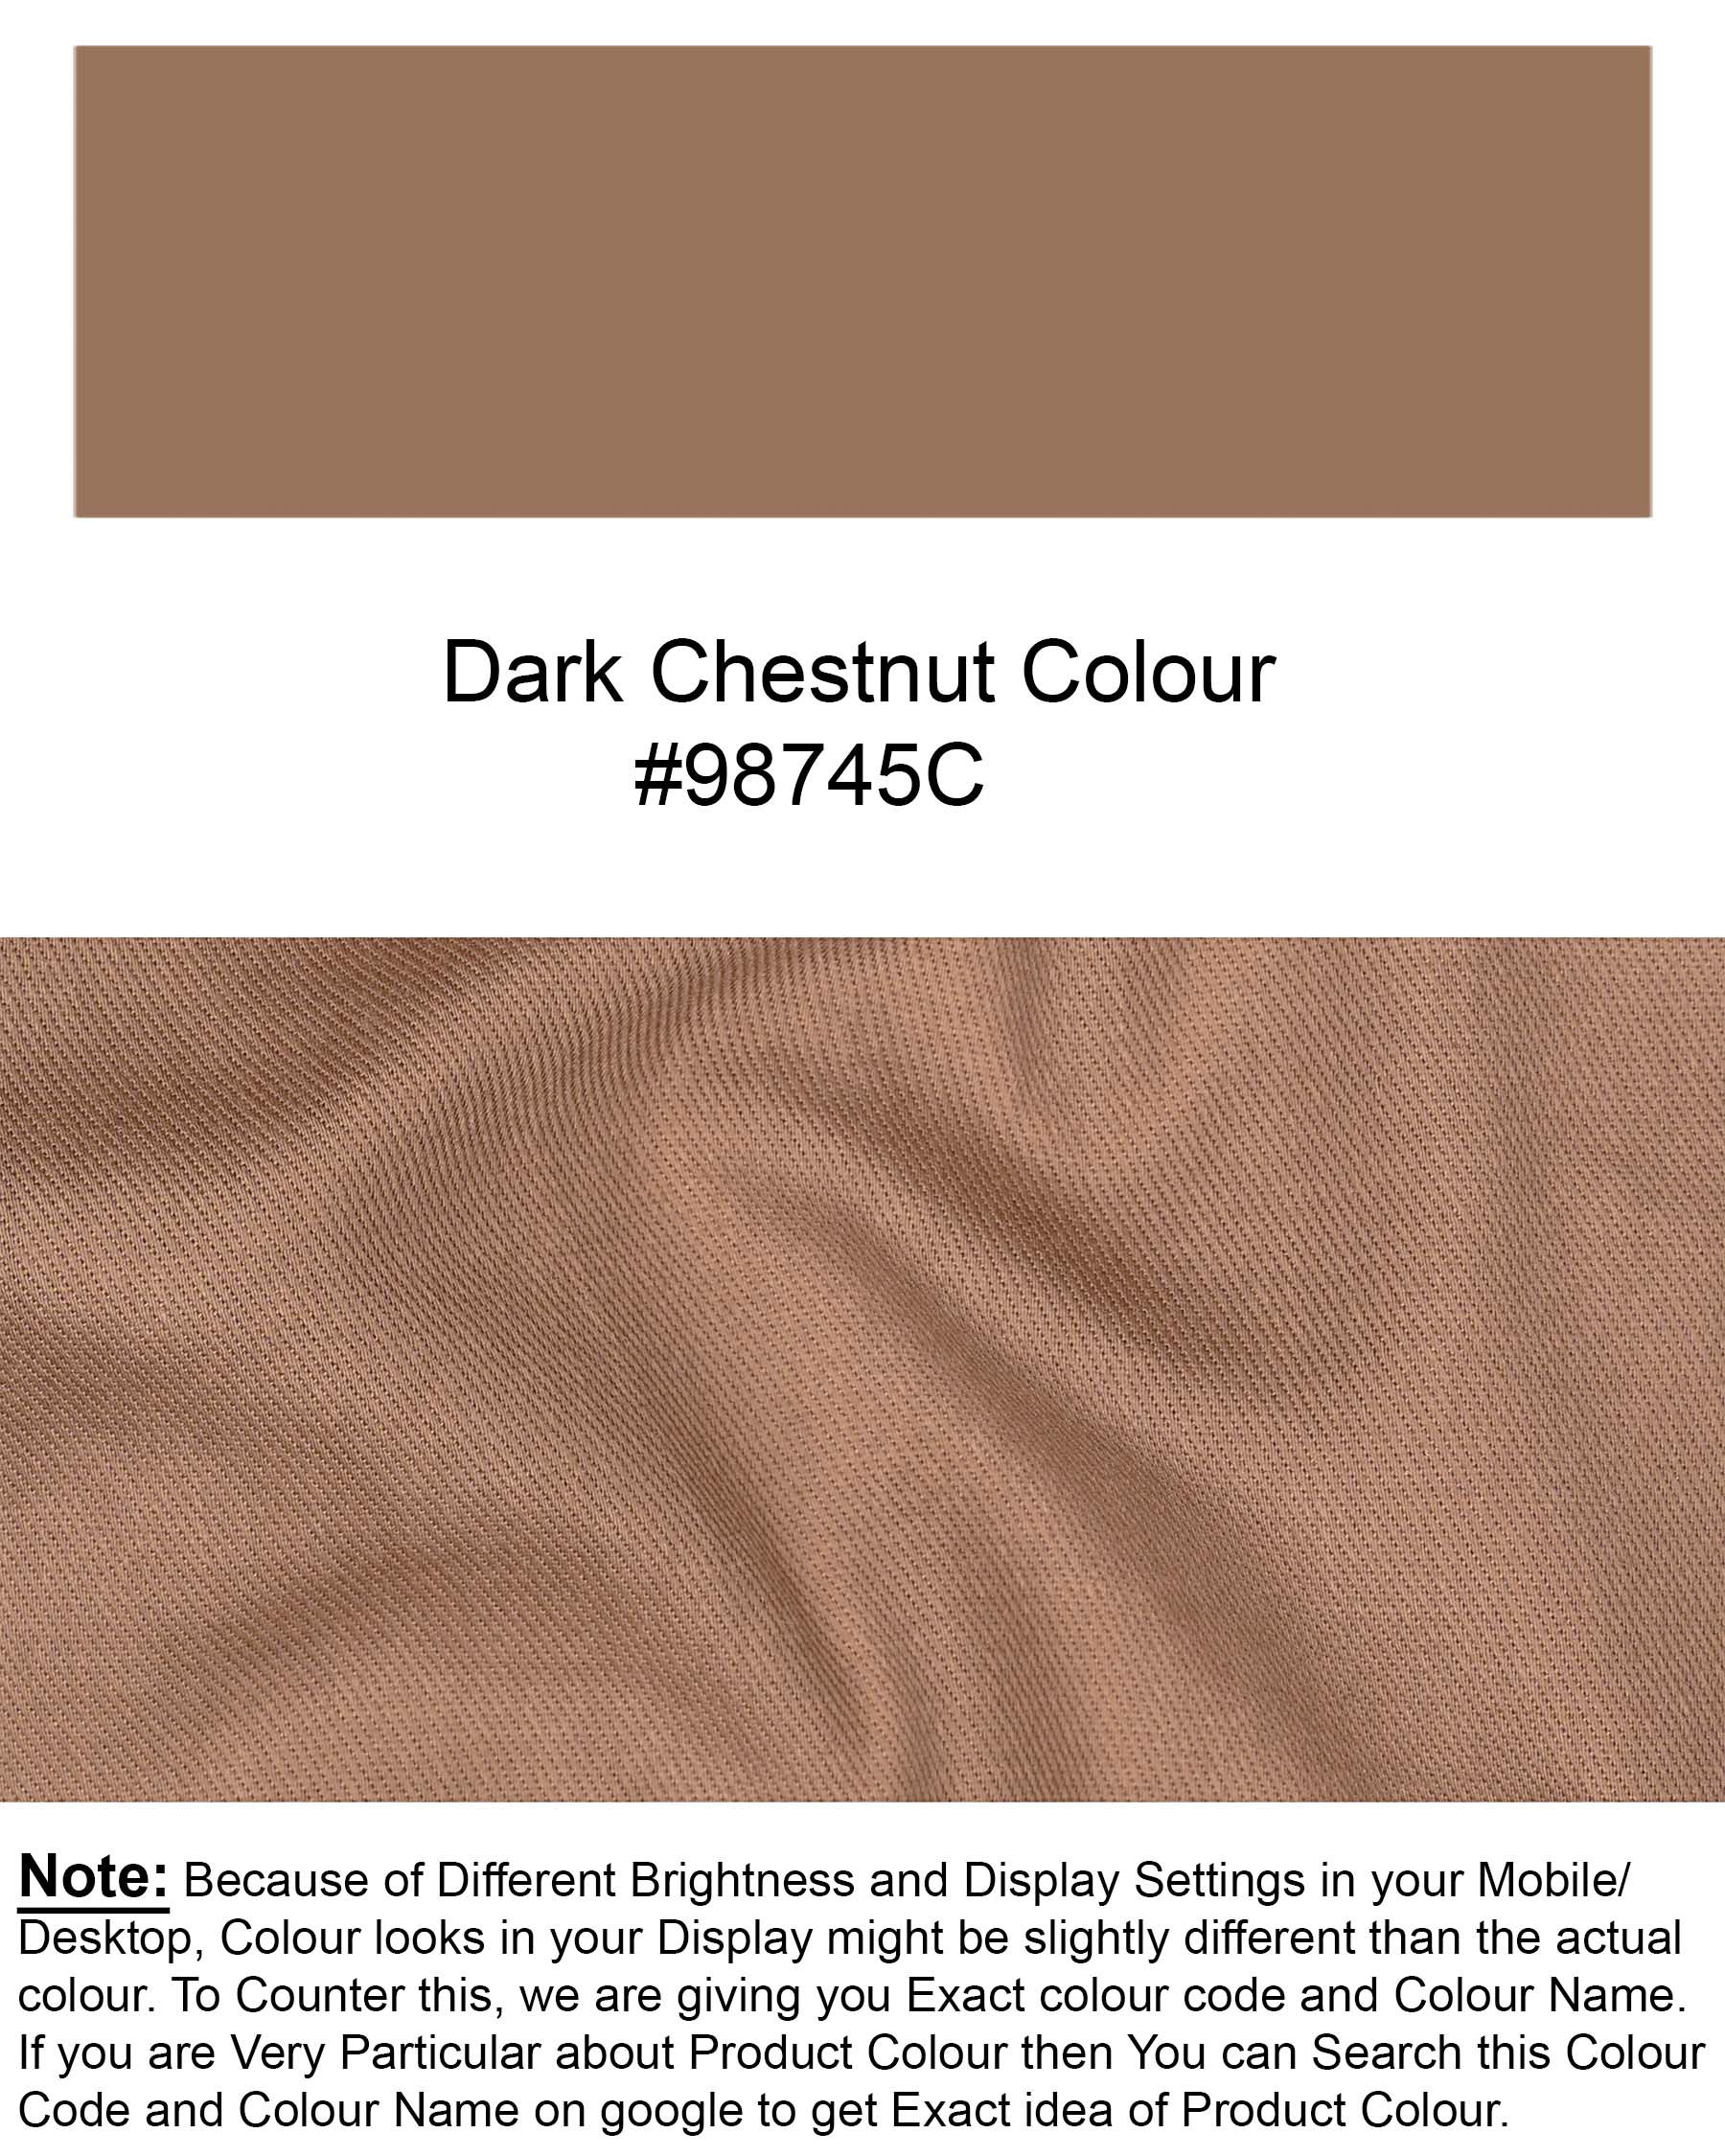 Dark Chestnut Brown Double Breasted Sports Blazer BL1904-DB-PP-36,BL1904-DB-PP-38,BL1904-DB-PP-40,BL1904-DB-PP-42,BL1904-DB-PP-44,BL1904-DB-PP-46,BL1904-DB-PP-48,BL1904-DB-PP-50,BL1904-DB-PP-52,BL1904-DB-PP-54,BL1904-DB-PP-56,BL1904-DB-PP-58,BL1904-DB-PP-60